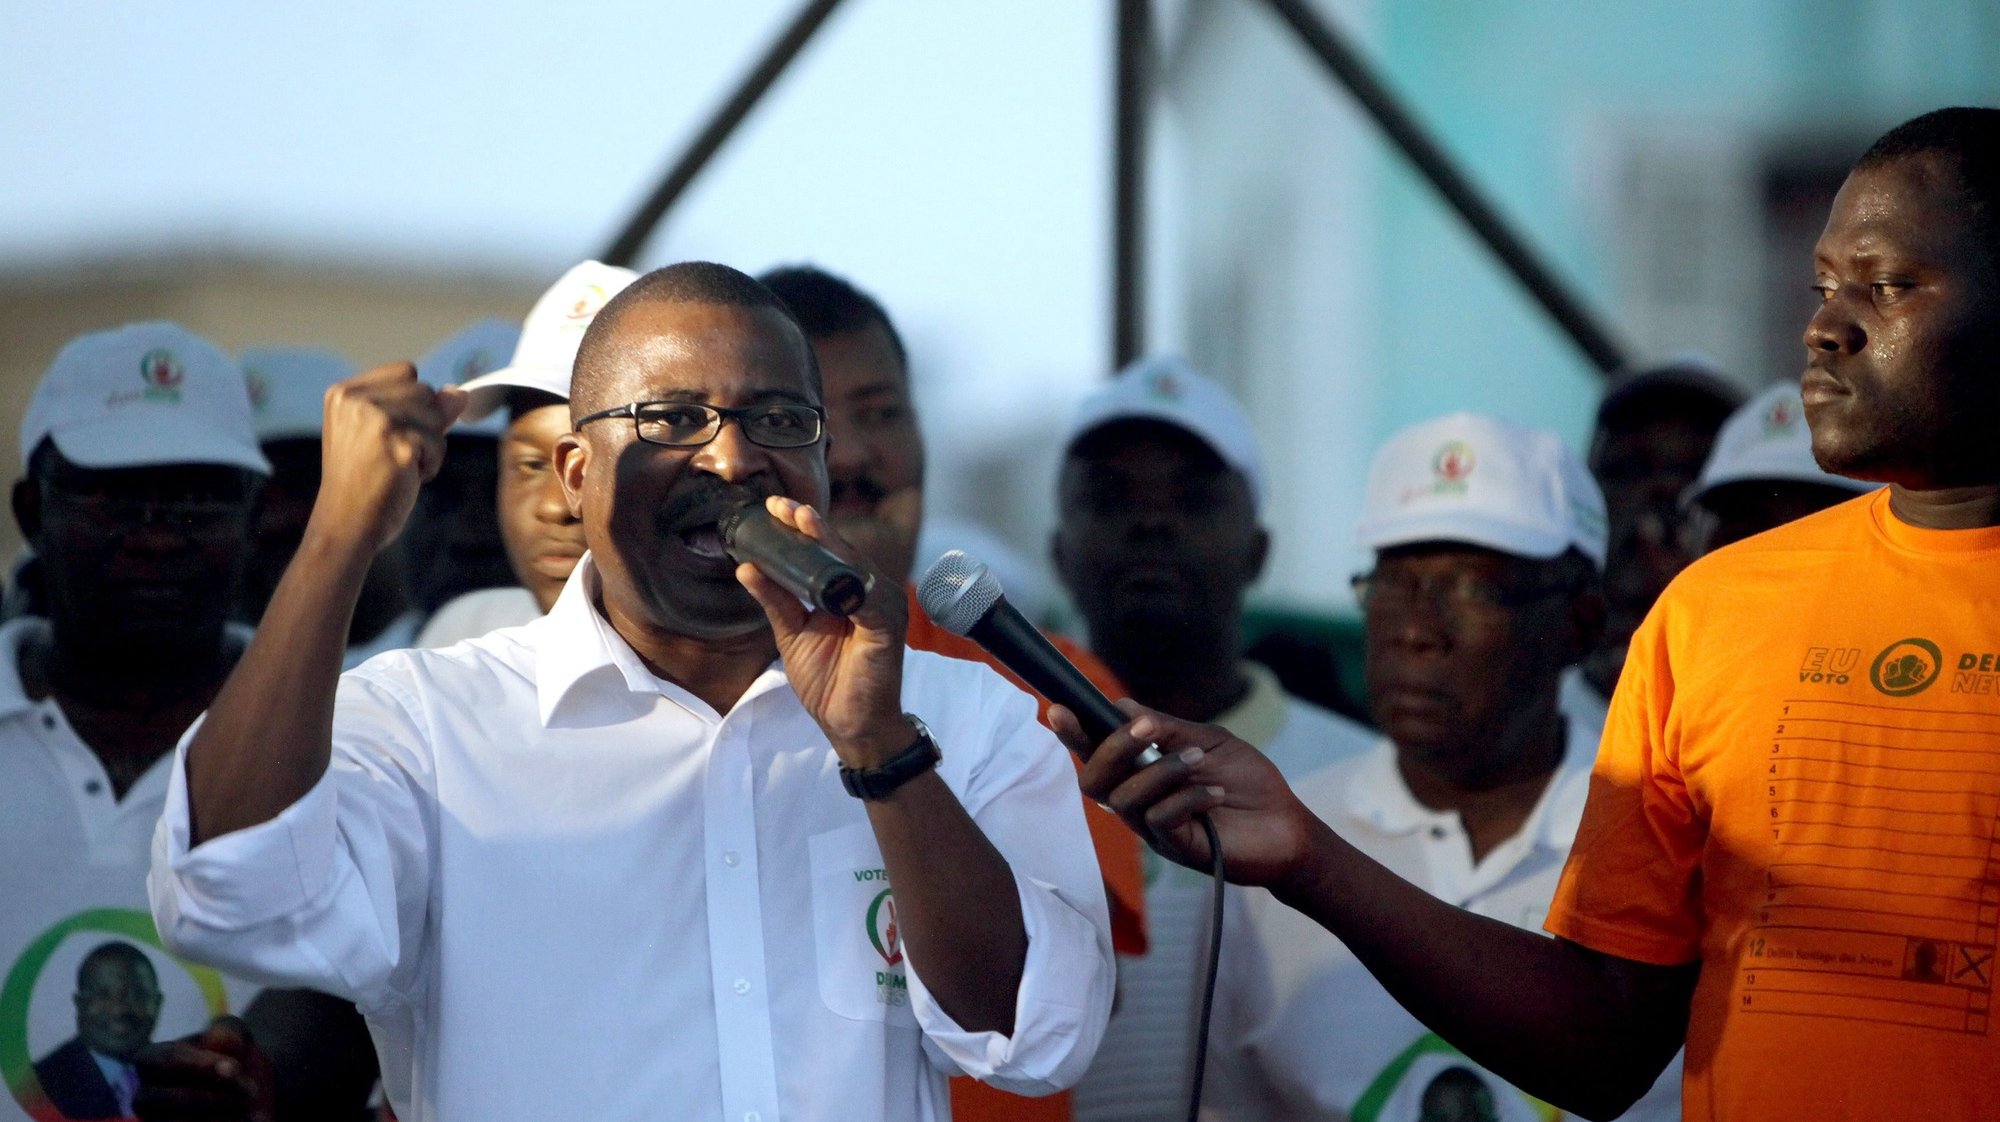 epa02825390 Delfim Neves, independent presidential candidate, delivers a speech during a rally in Sao Tome, Sao Tome and Principe, 15 July 2011. The elections are scheduled for 17 July 2011.  EPA/JOSE COELHO